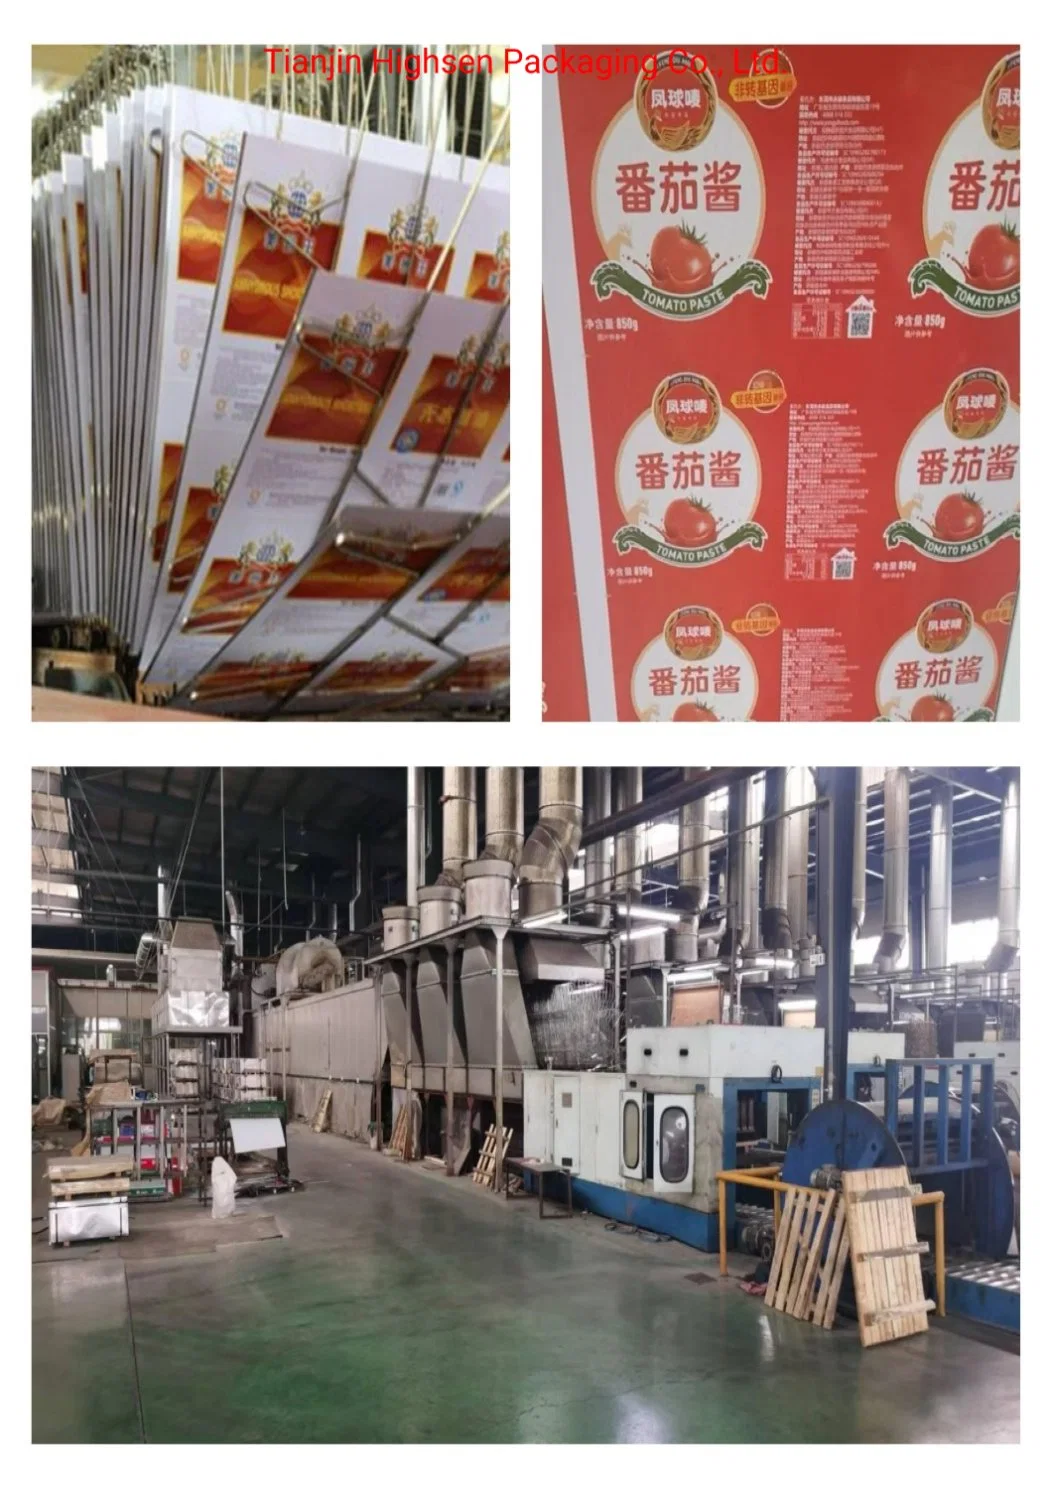 JIS G3303 Standard Metal Can Packaging Clear Lacquered and Printed Misprinted Tinplate